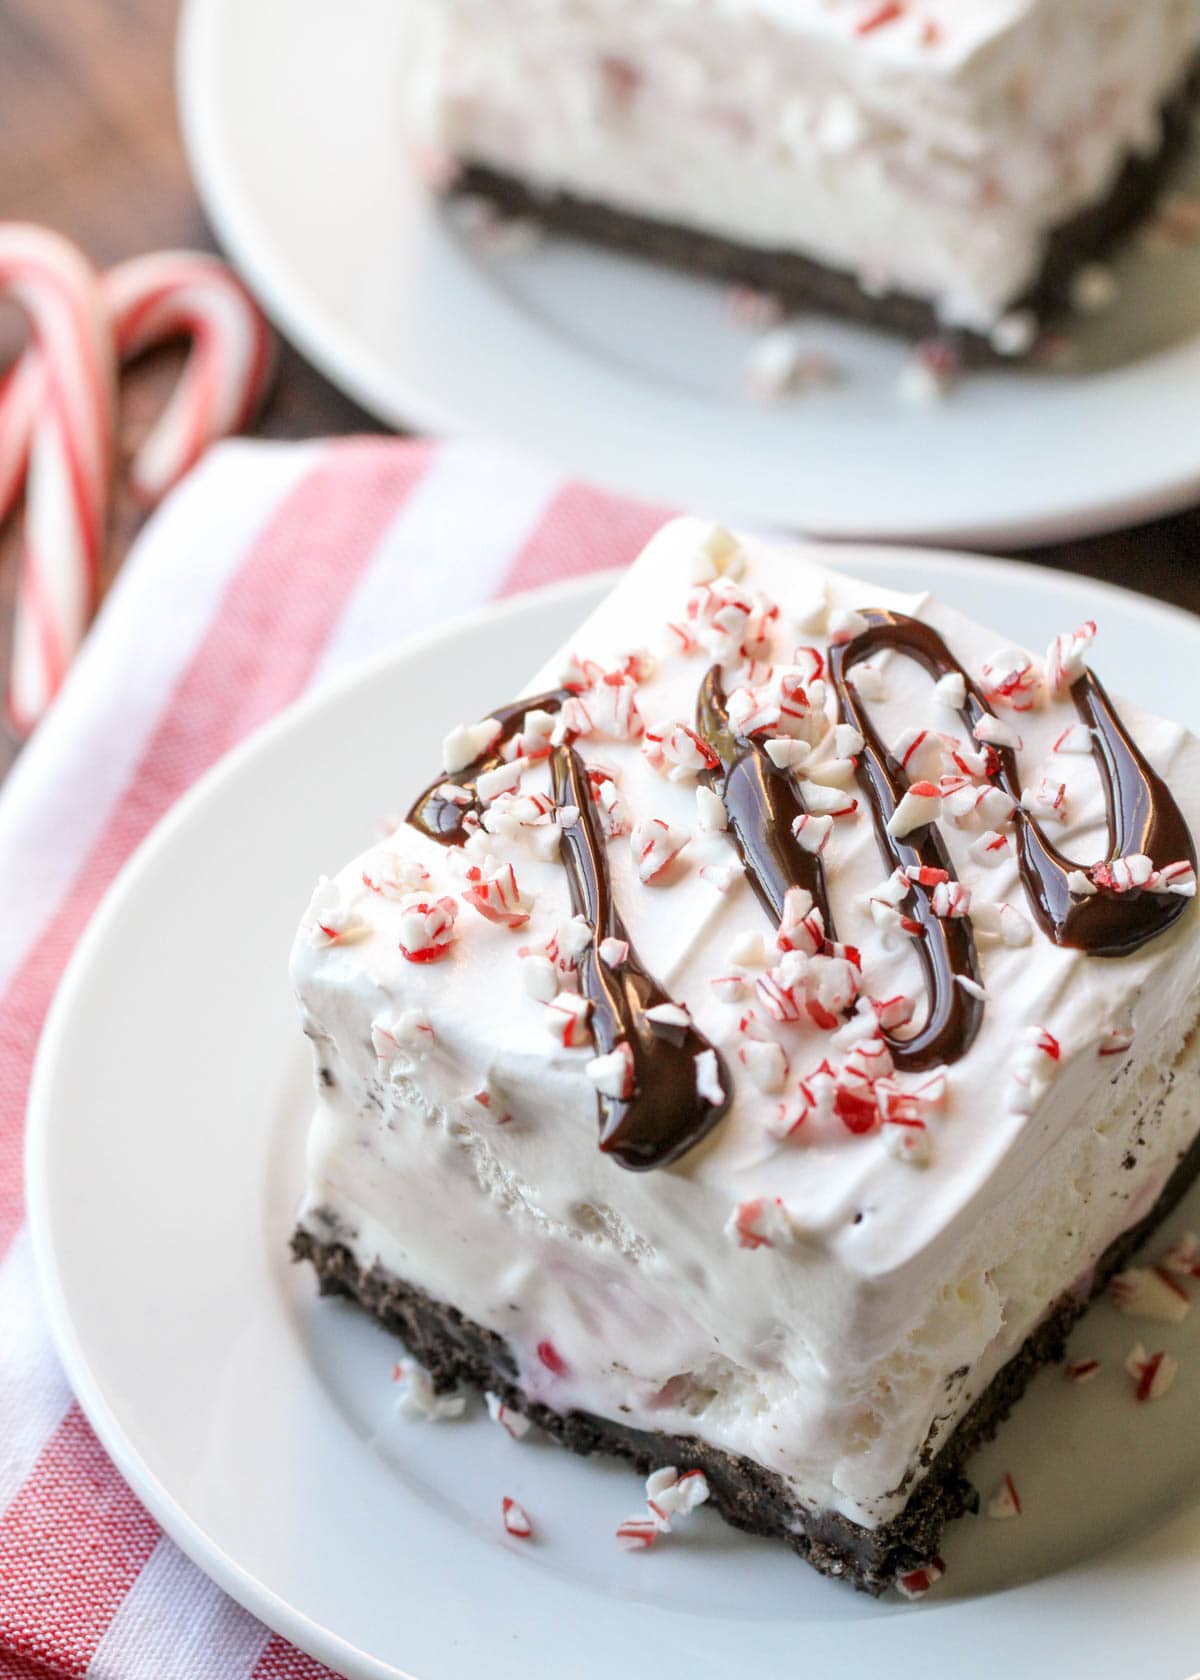 slice of peppermint ice cream dessert topped with chocolate syrup and crushed peppermint.